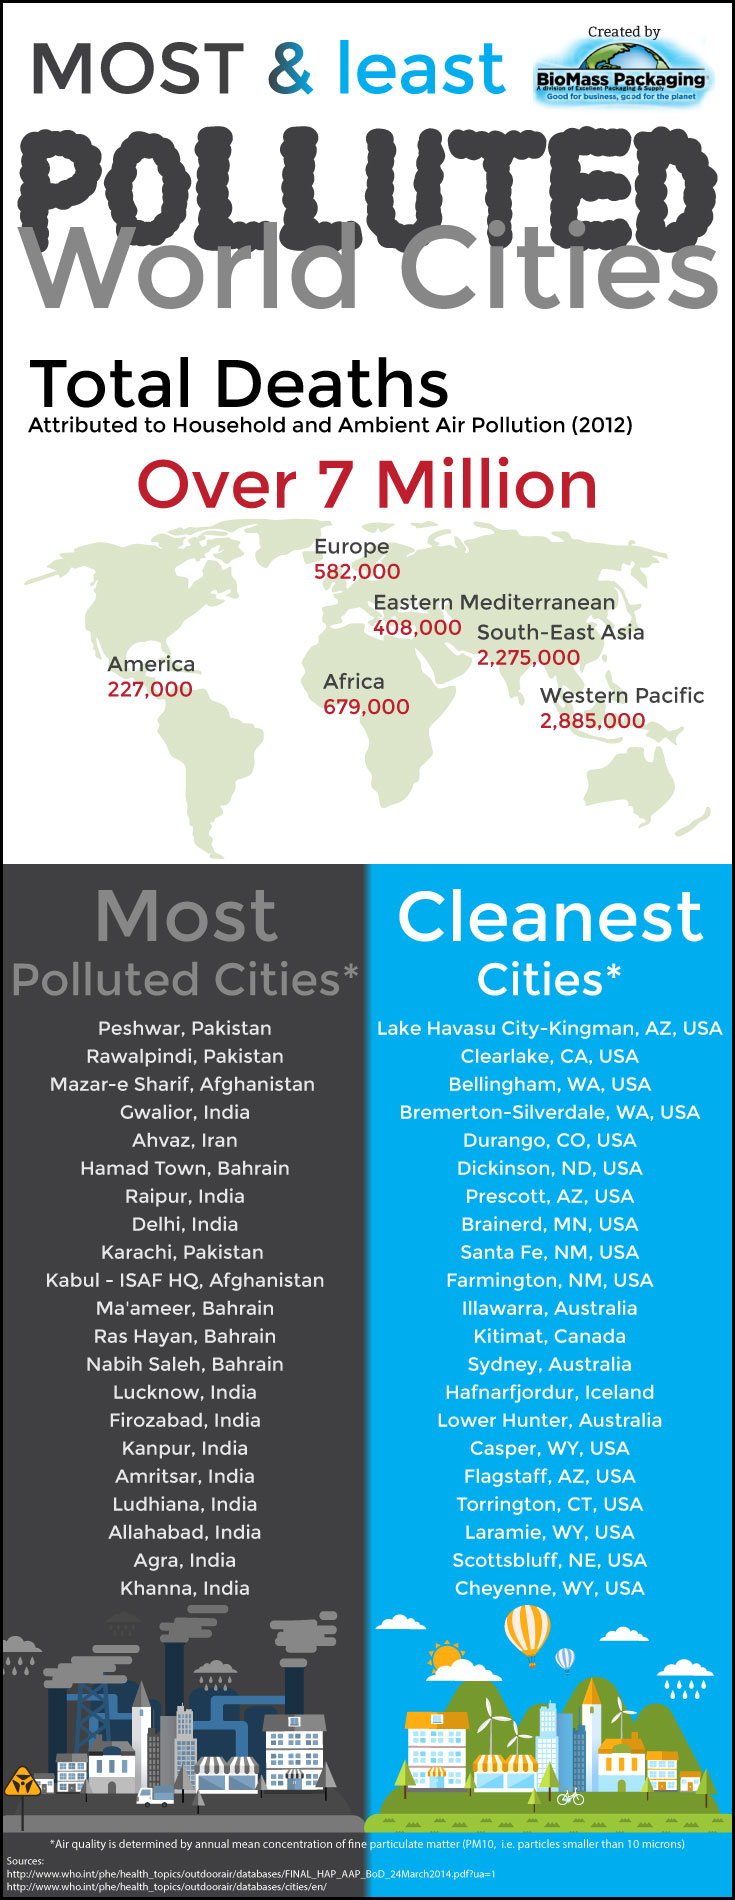 Most/Least Polluted Cities